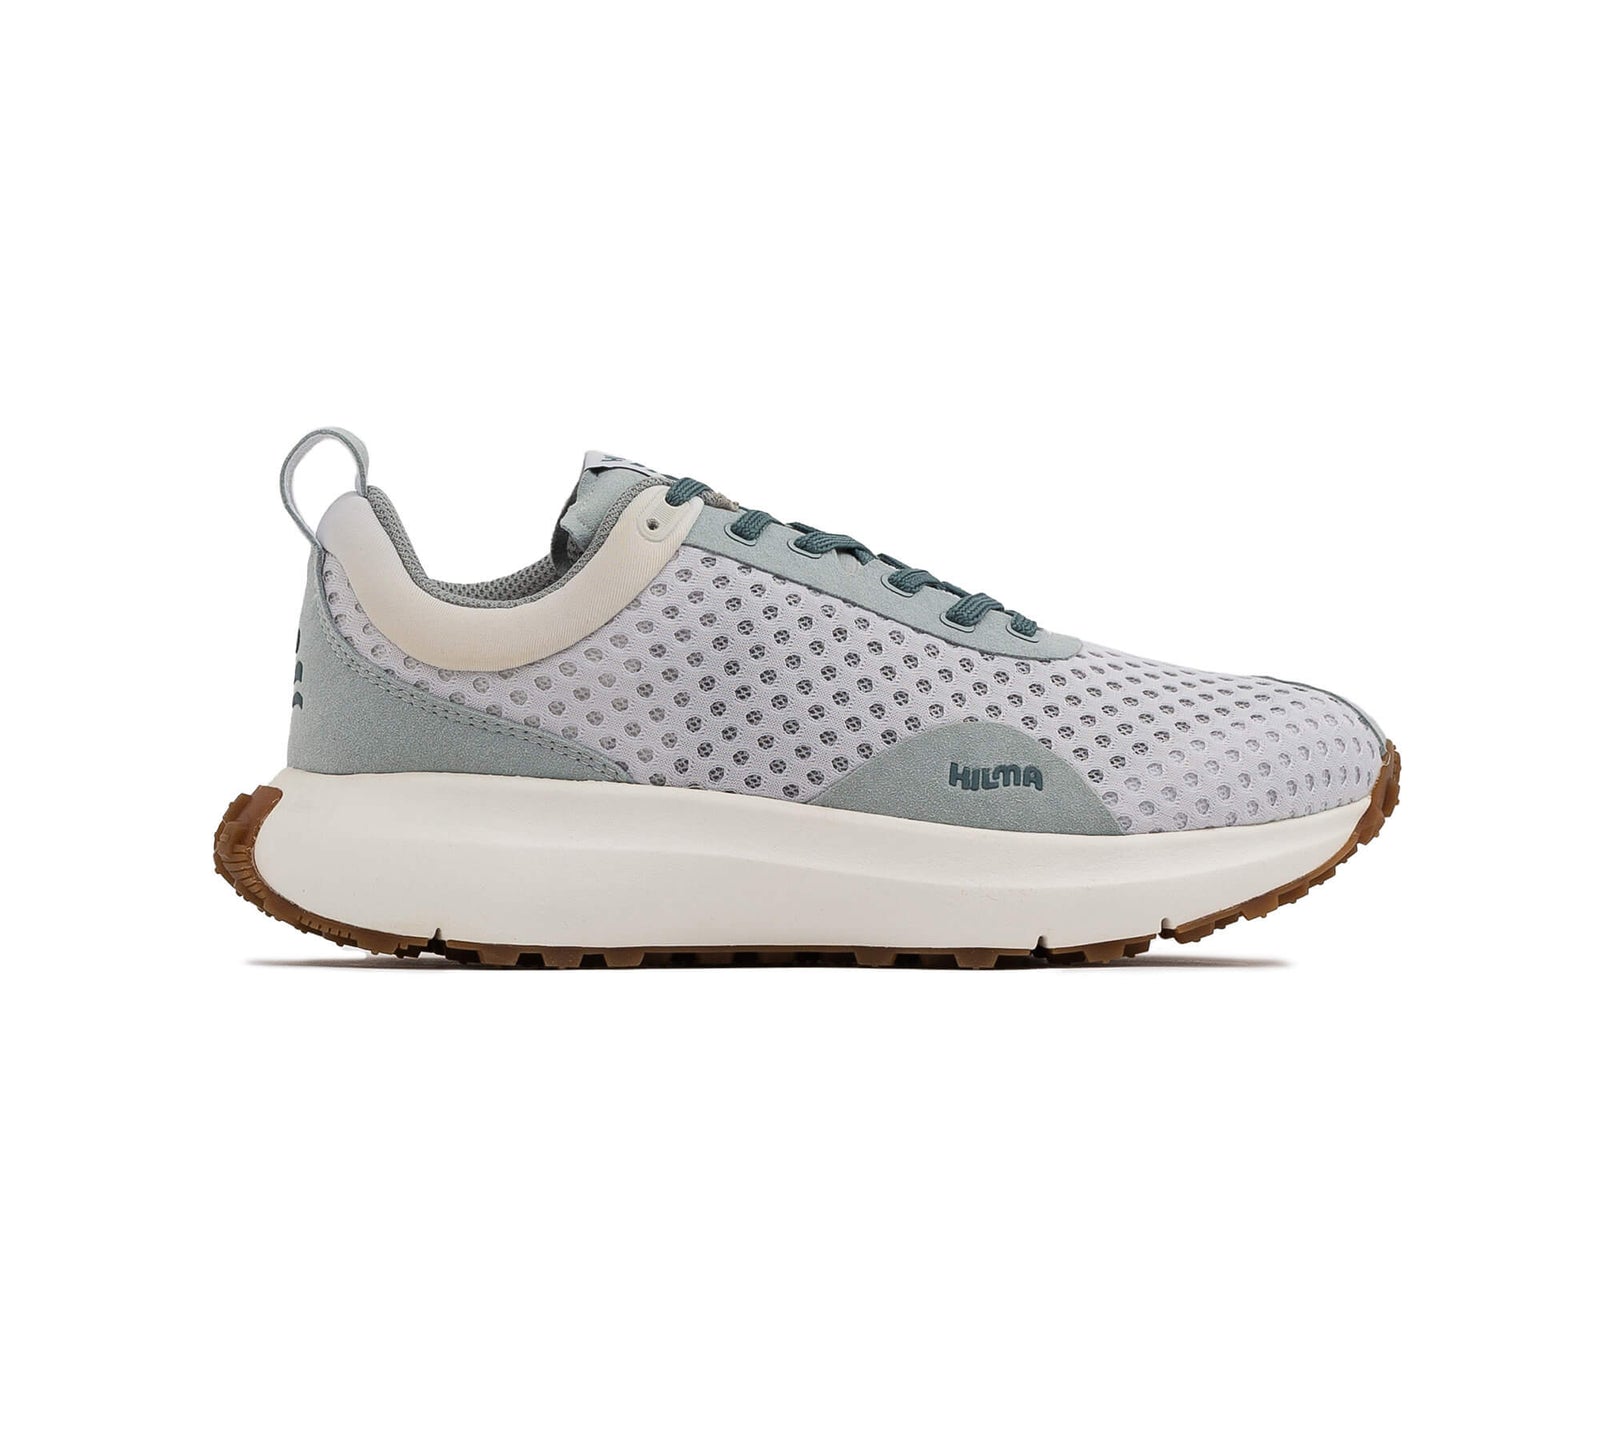 Exterior side view of right Everywhere Hilma Running Shoe in Mirage Grey